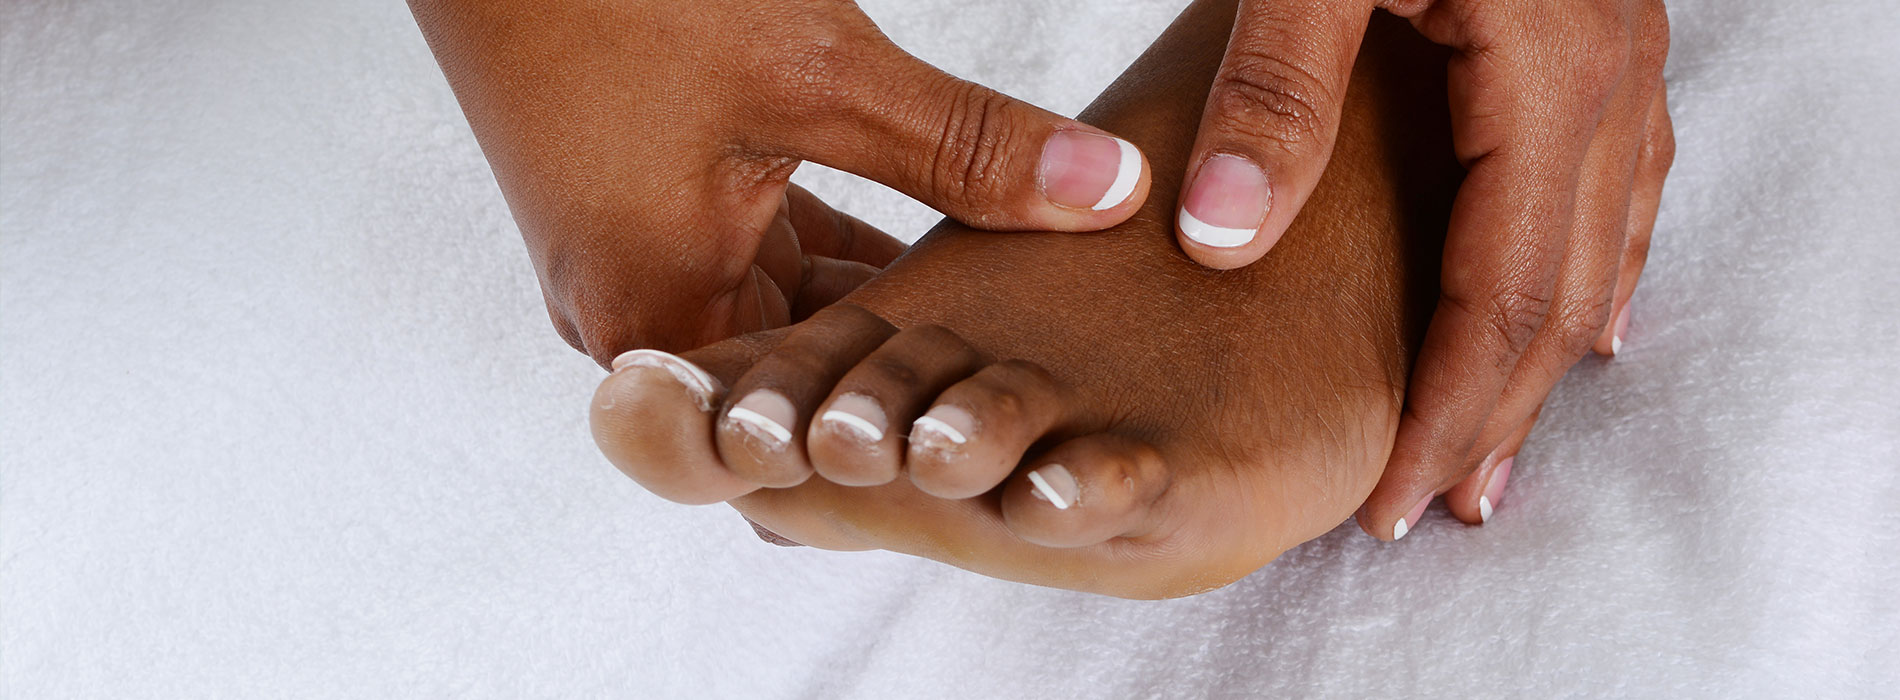 Premiere Pointe Podiatry | Geriatric Foot Care, Minimally Invasive Surgery and Wound Care